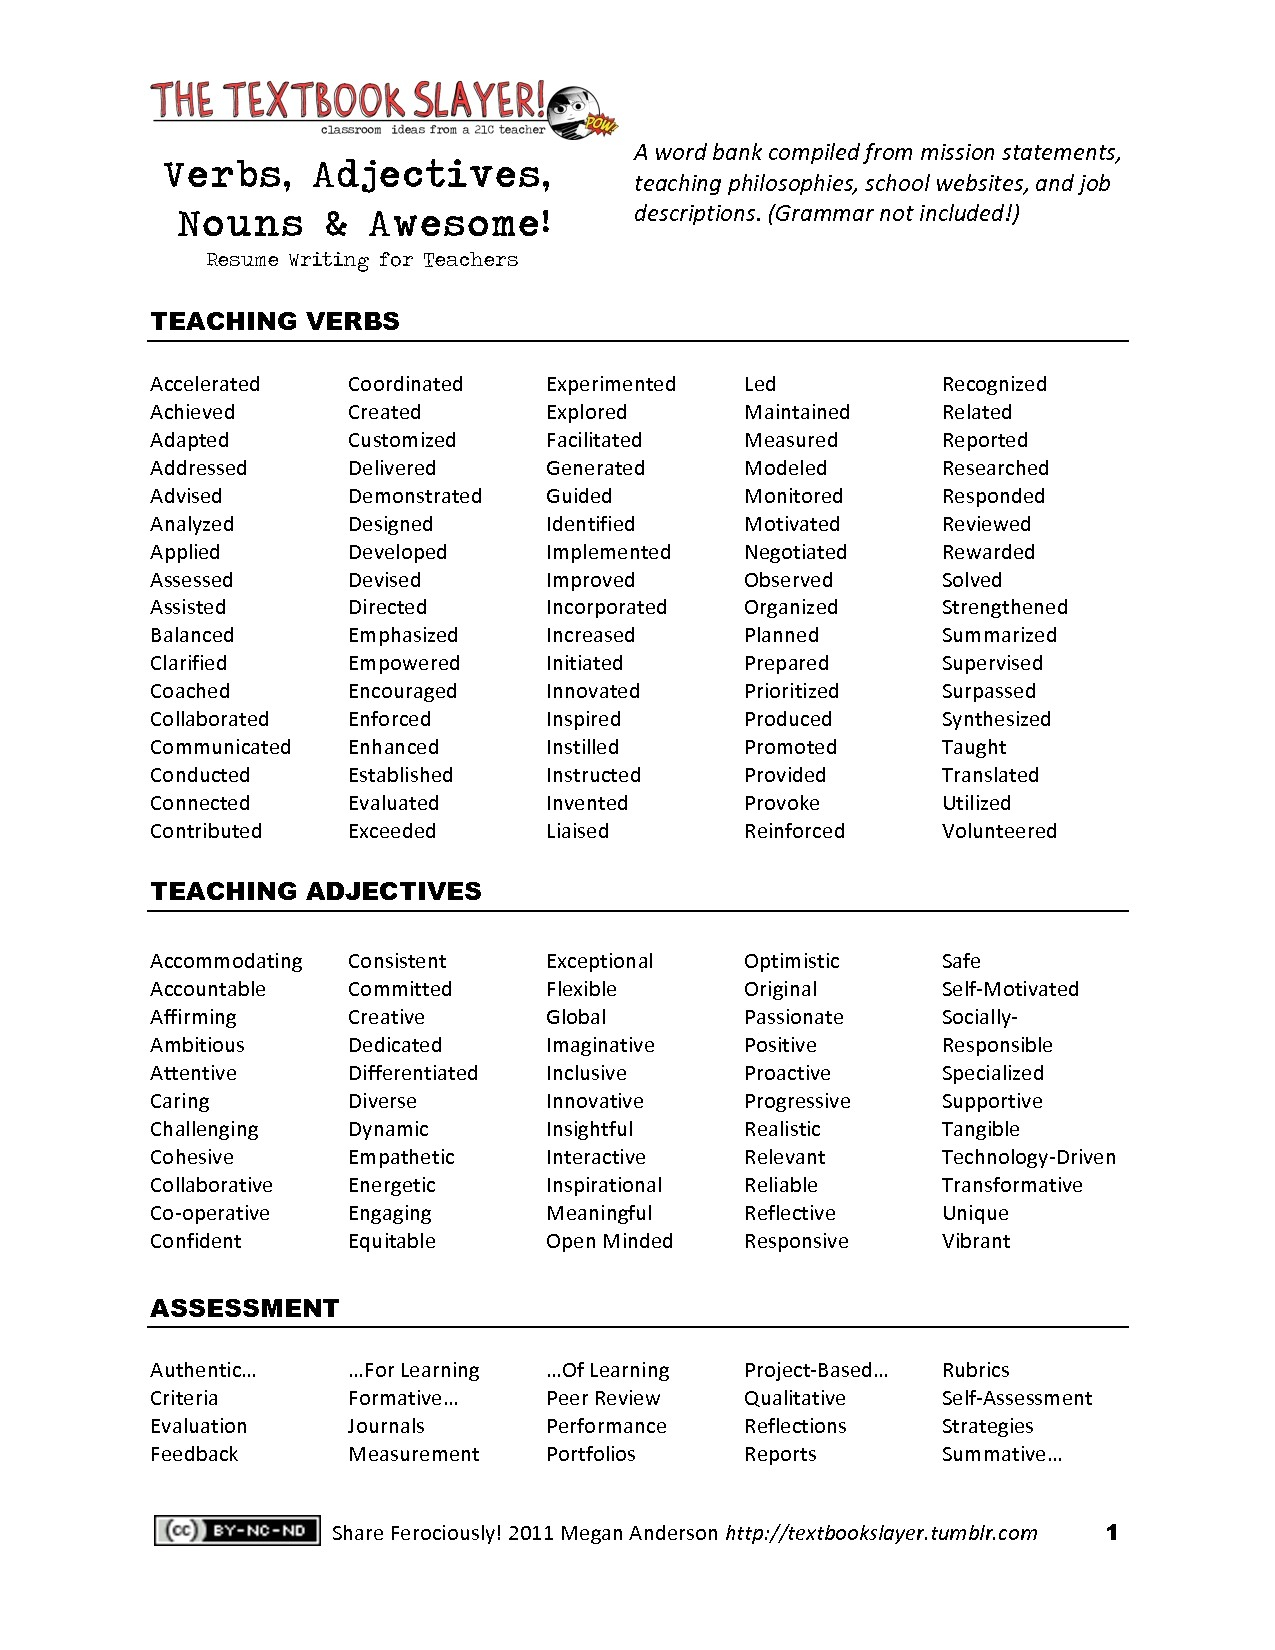 Resume Words To Use Keywords To Use In A Resume Elegant Adjectives New Powerful Words